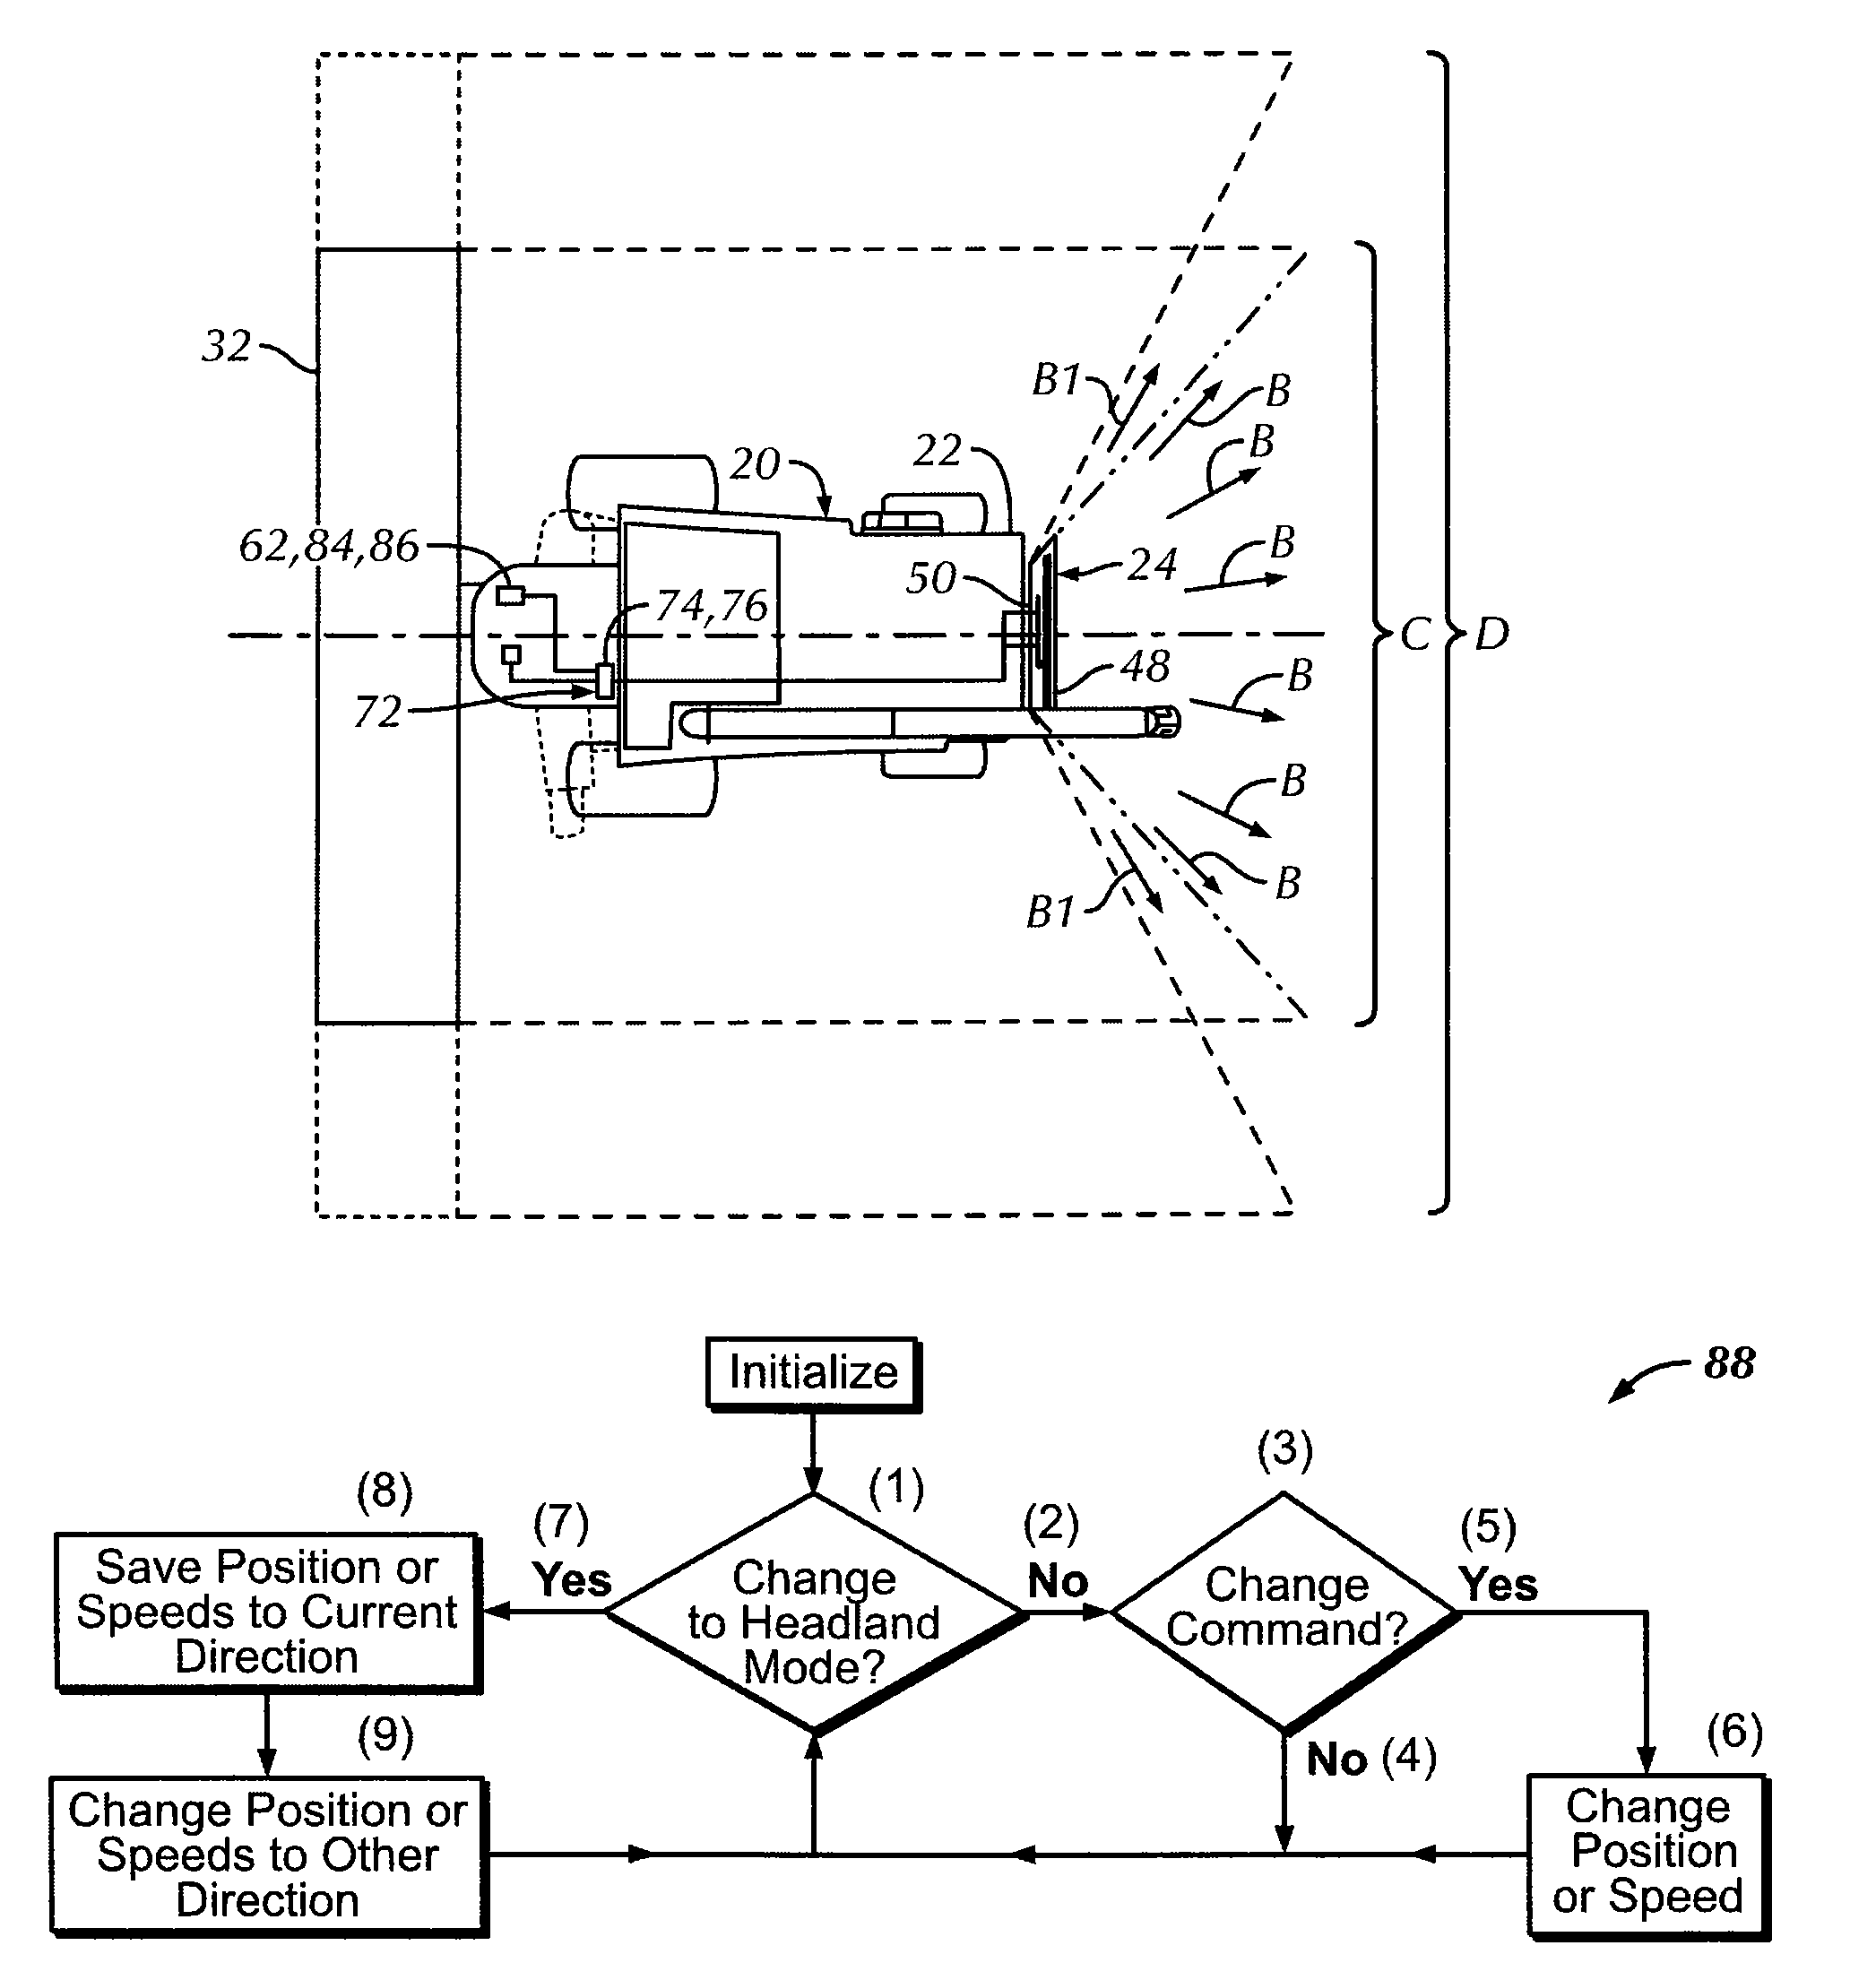 Apparatus and method for automatically controlling the settings of an adjustable crop residue spreader of an agricultural combine